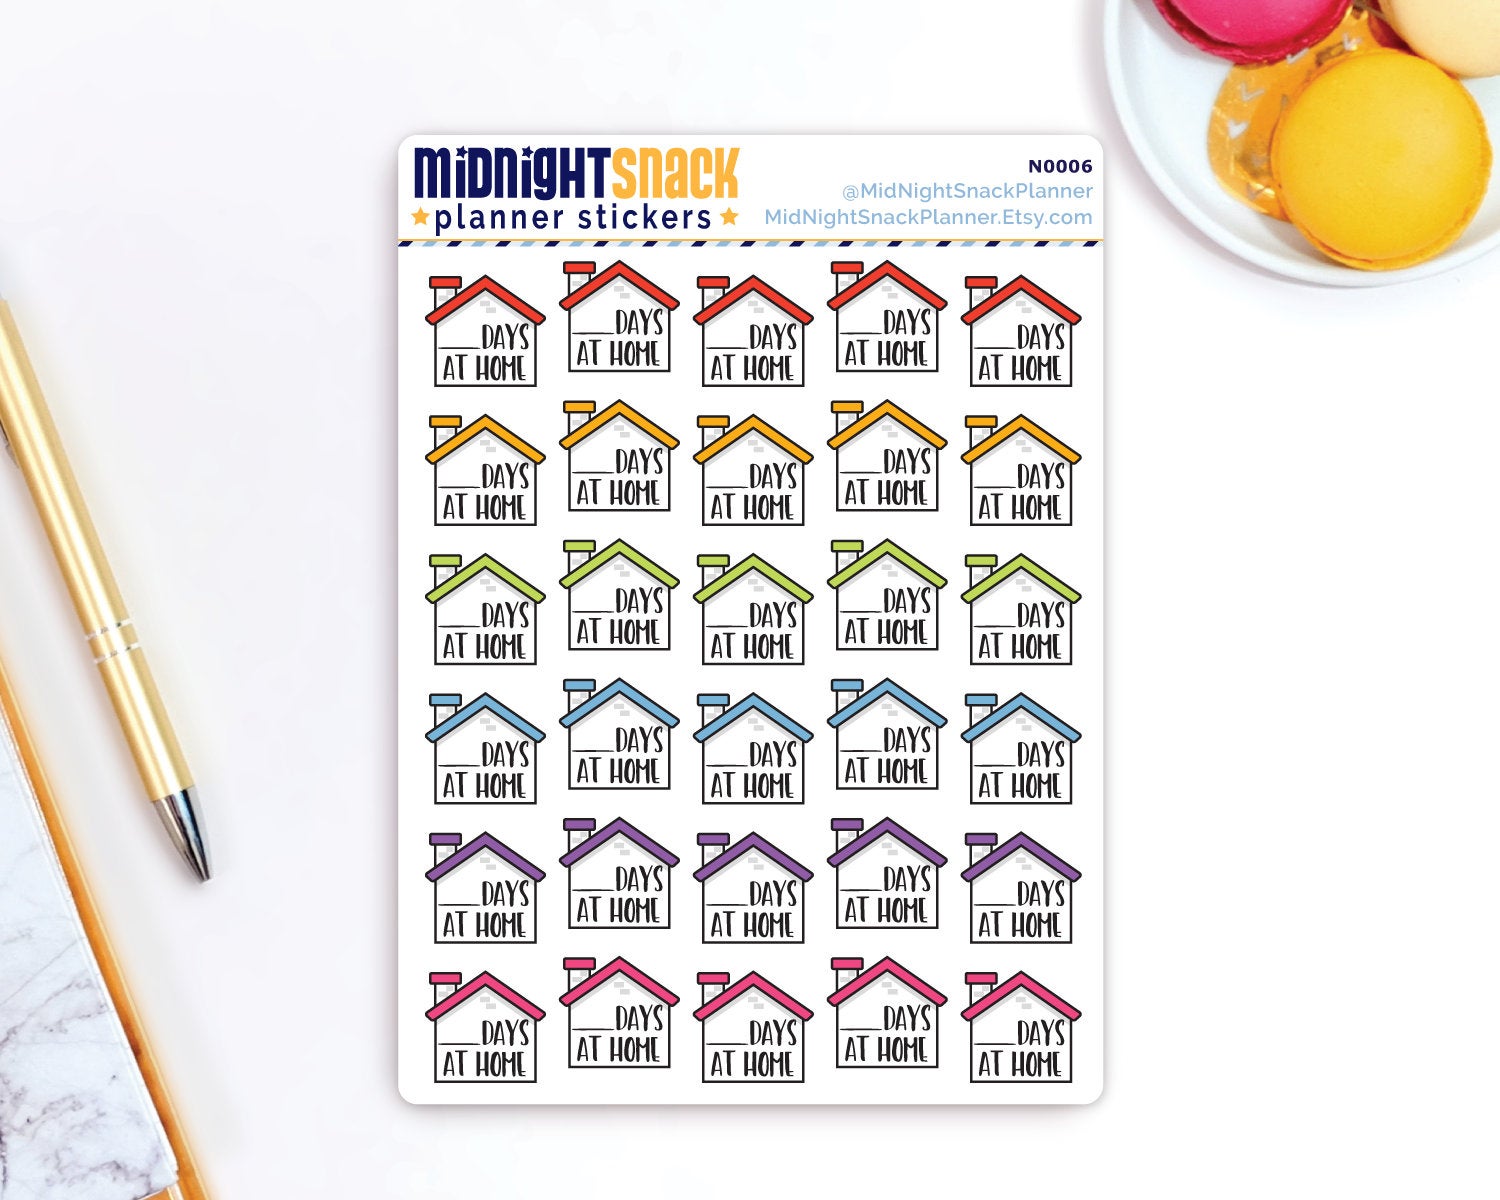 Stay Home Stay Safe: Quarantine Counter Planner Stickers Midnight Snack Planner